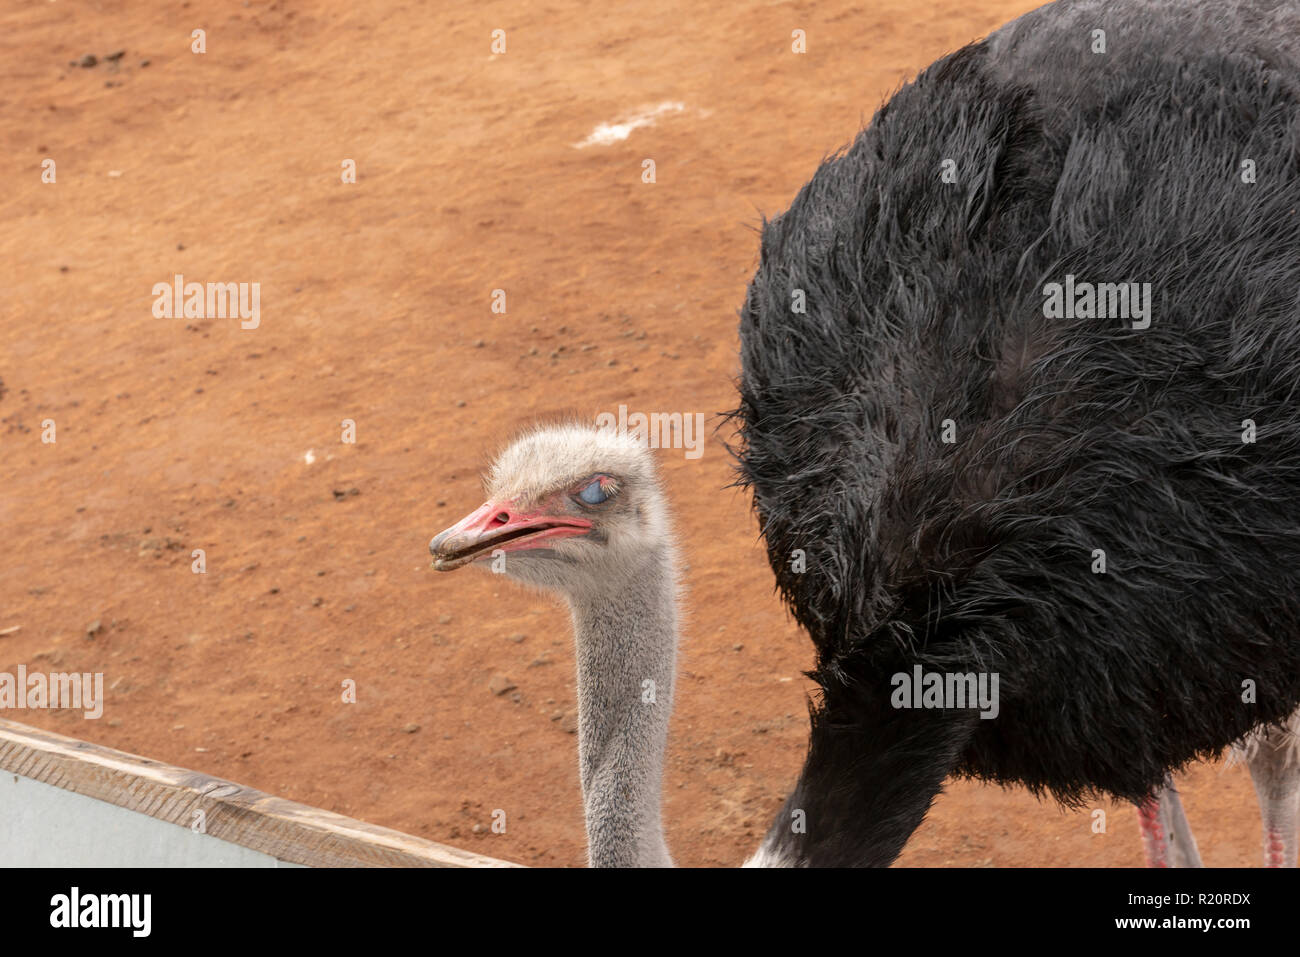 Common Ostrich at Safari Ostrich Farm, Oudtshoorn, South Africa Stock Photo